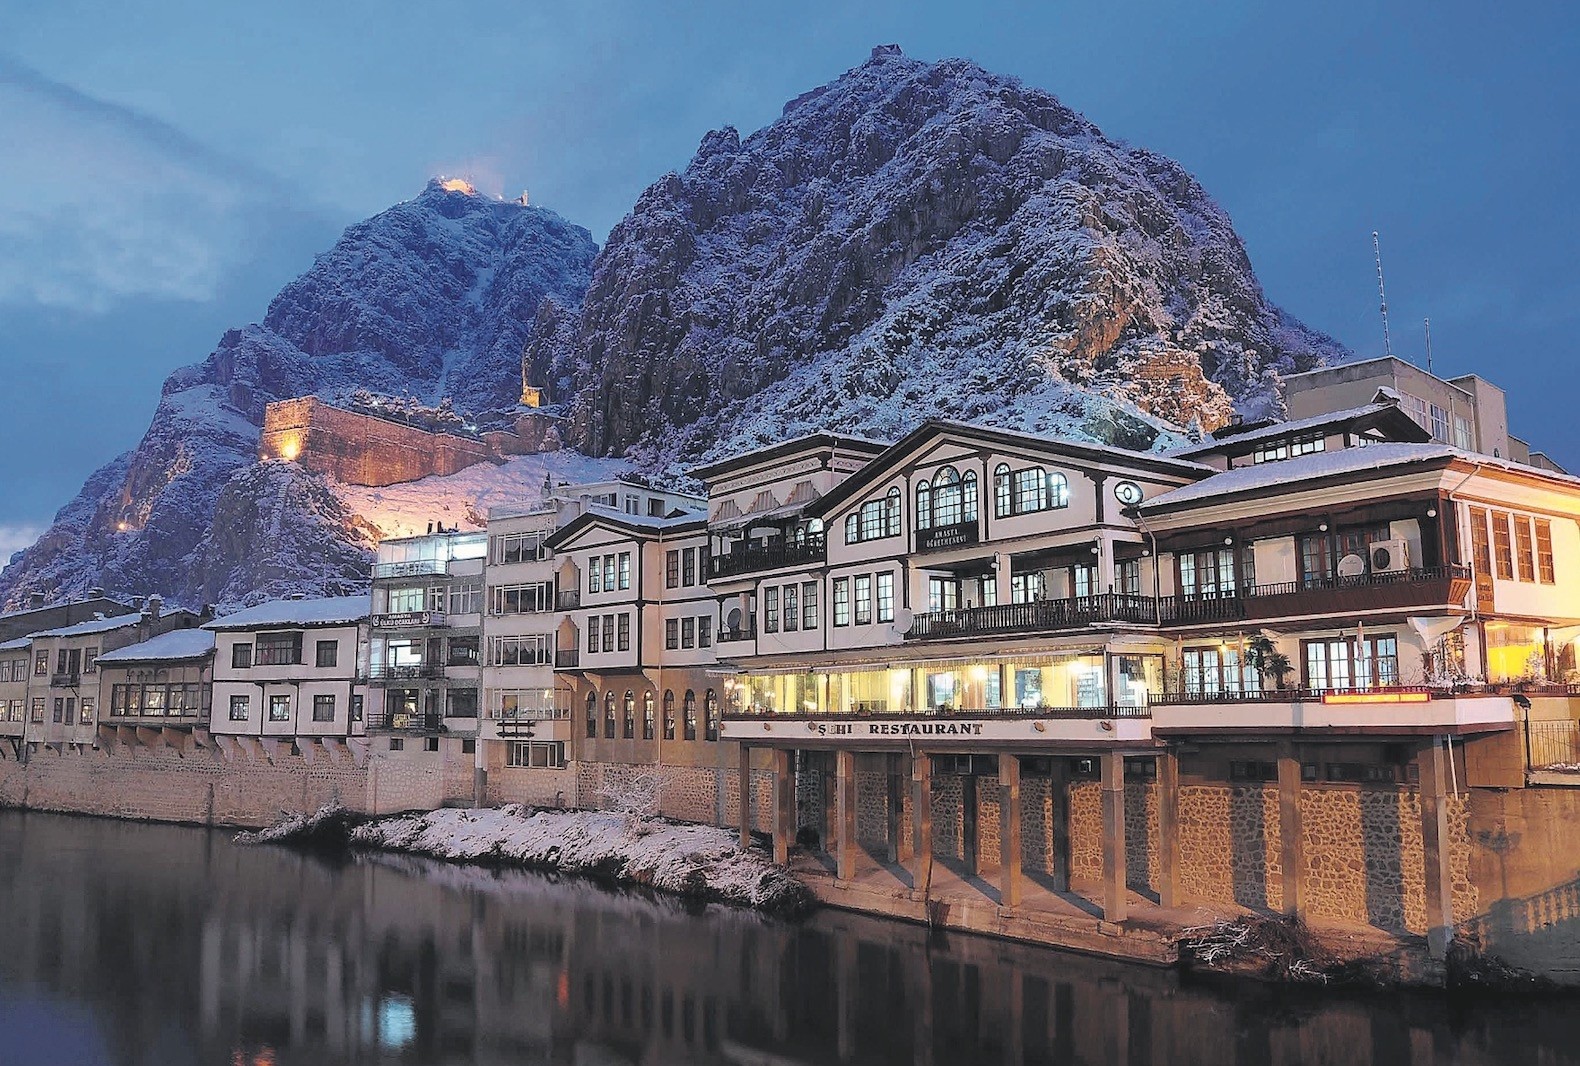 The city of Amasya is gorgeously set along a winding river valley, nestled into rocky cliffs on one side, and at the foot of a roll of green mountains on the other.